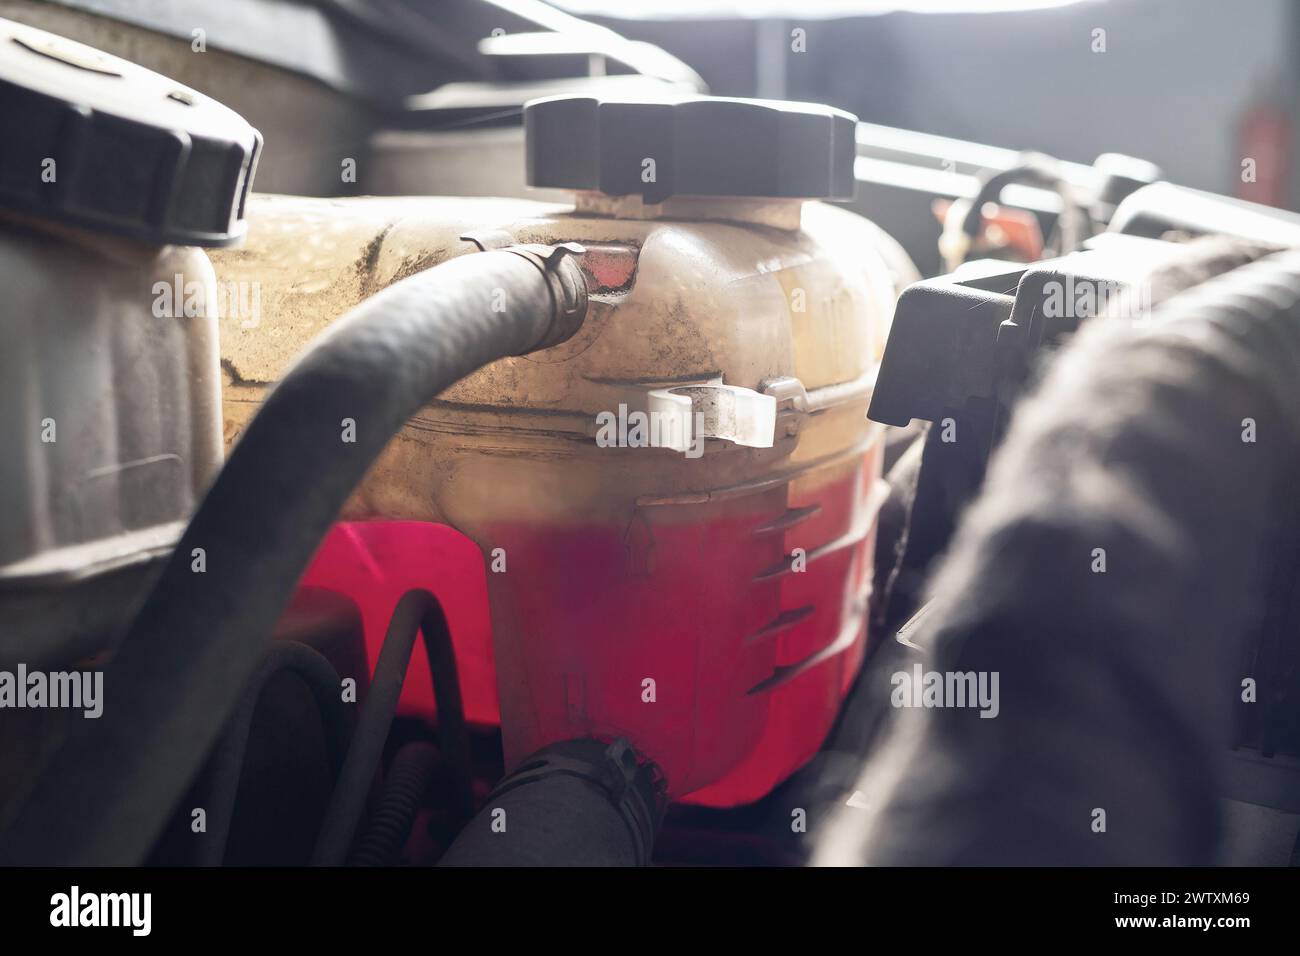 Dirty tank of a car filled with antifreeze, engine coolant Stock Photo